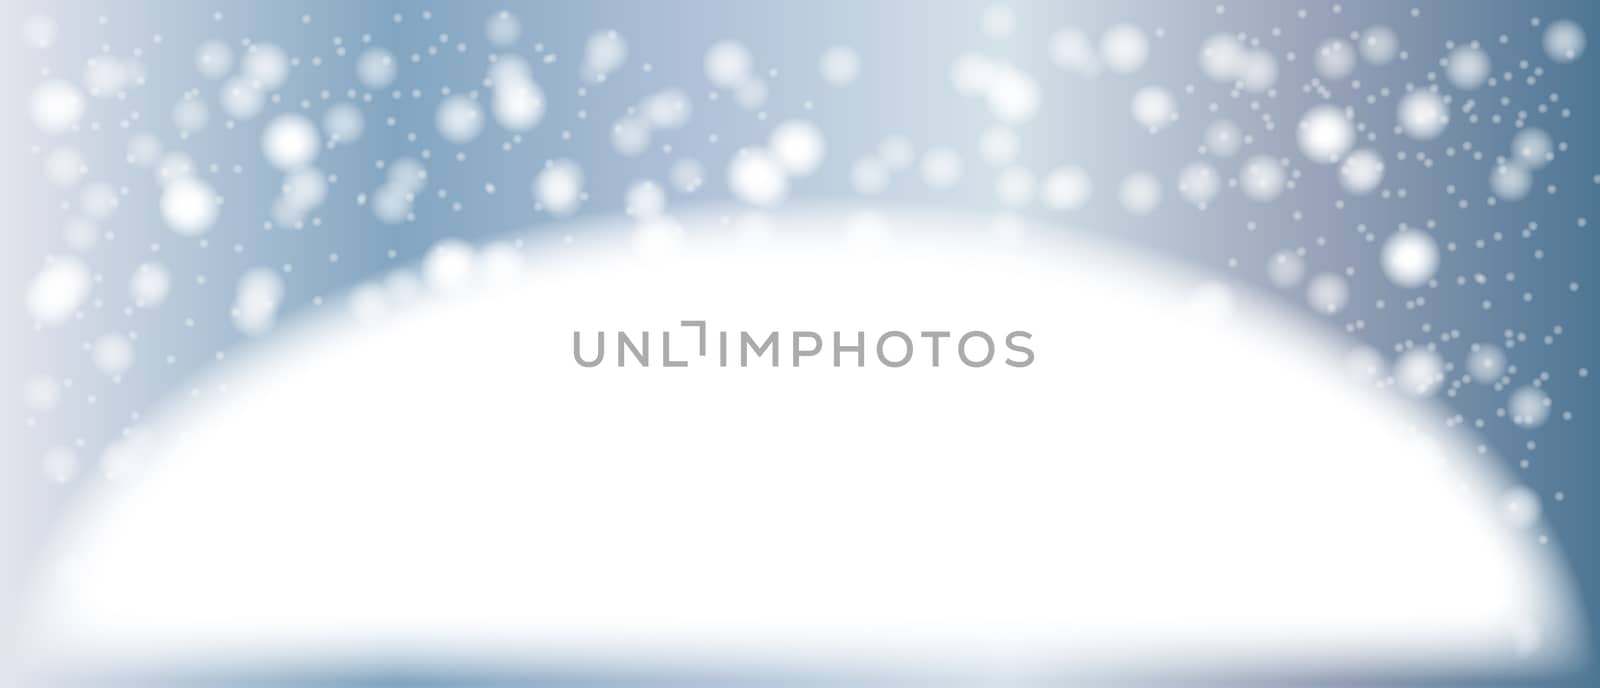 Background of falling snow against a blue background with white copy space area